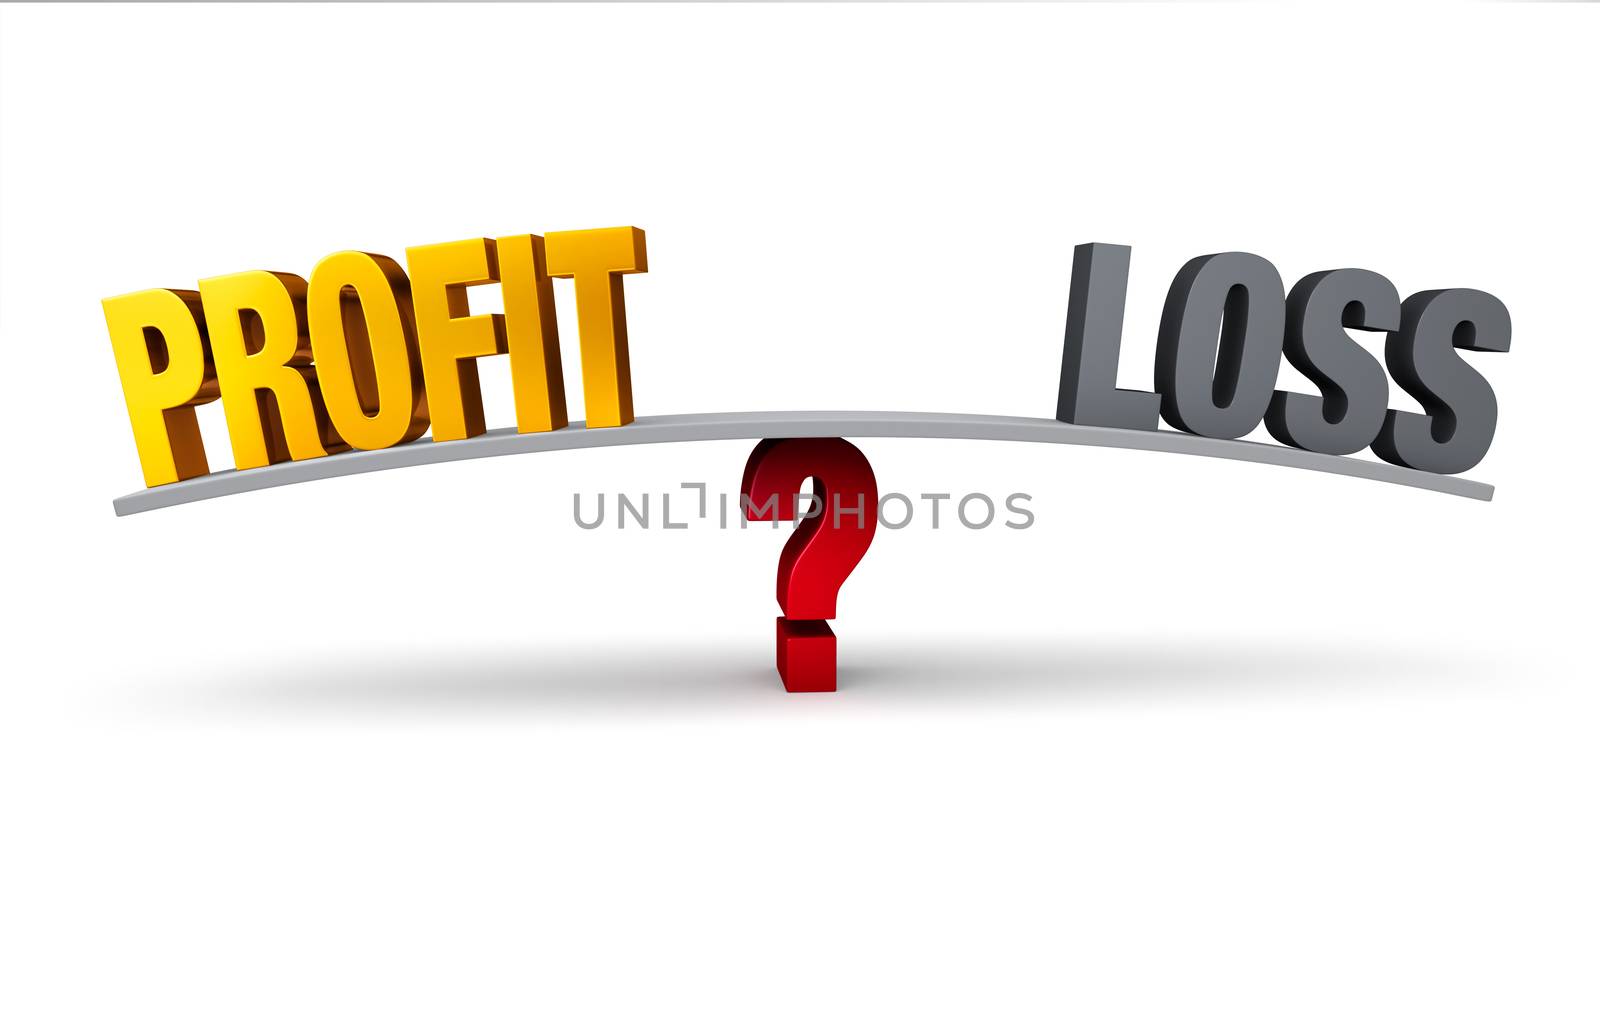 Bright, gold "PROFIT" and dark, gray "LOSS" sit on opposite ends of a gray board balanced on a red question mark. Isolated on white.